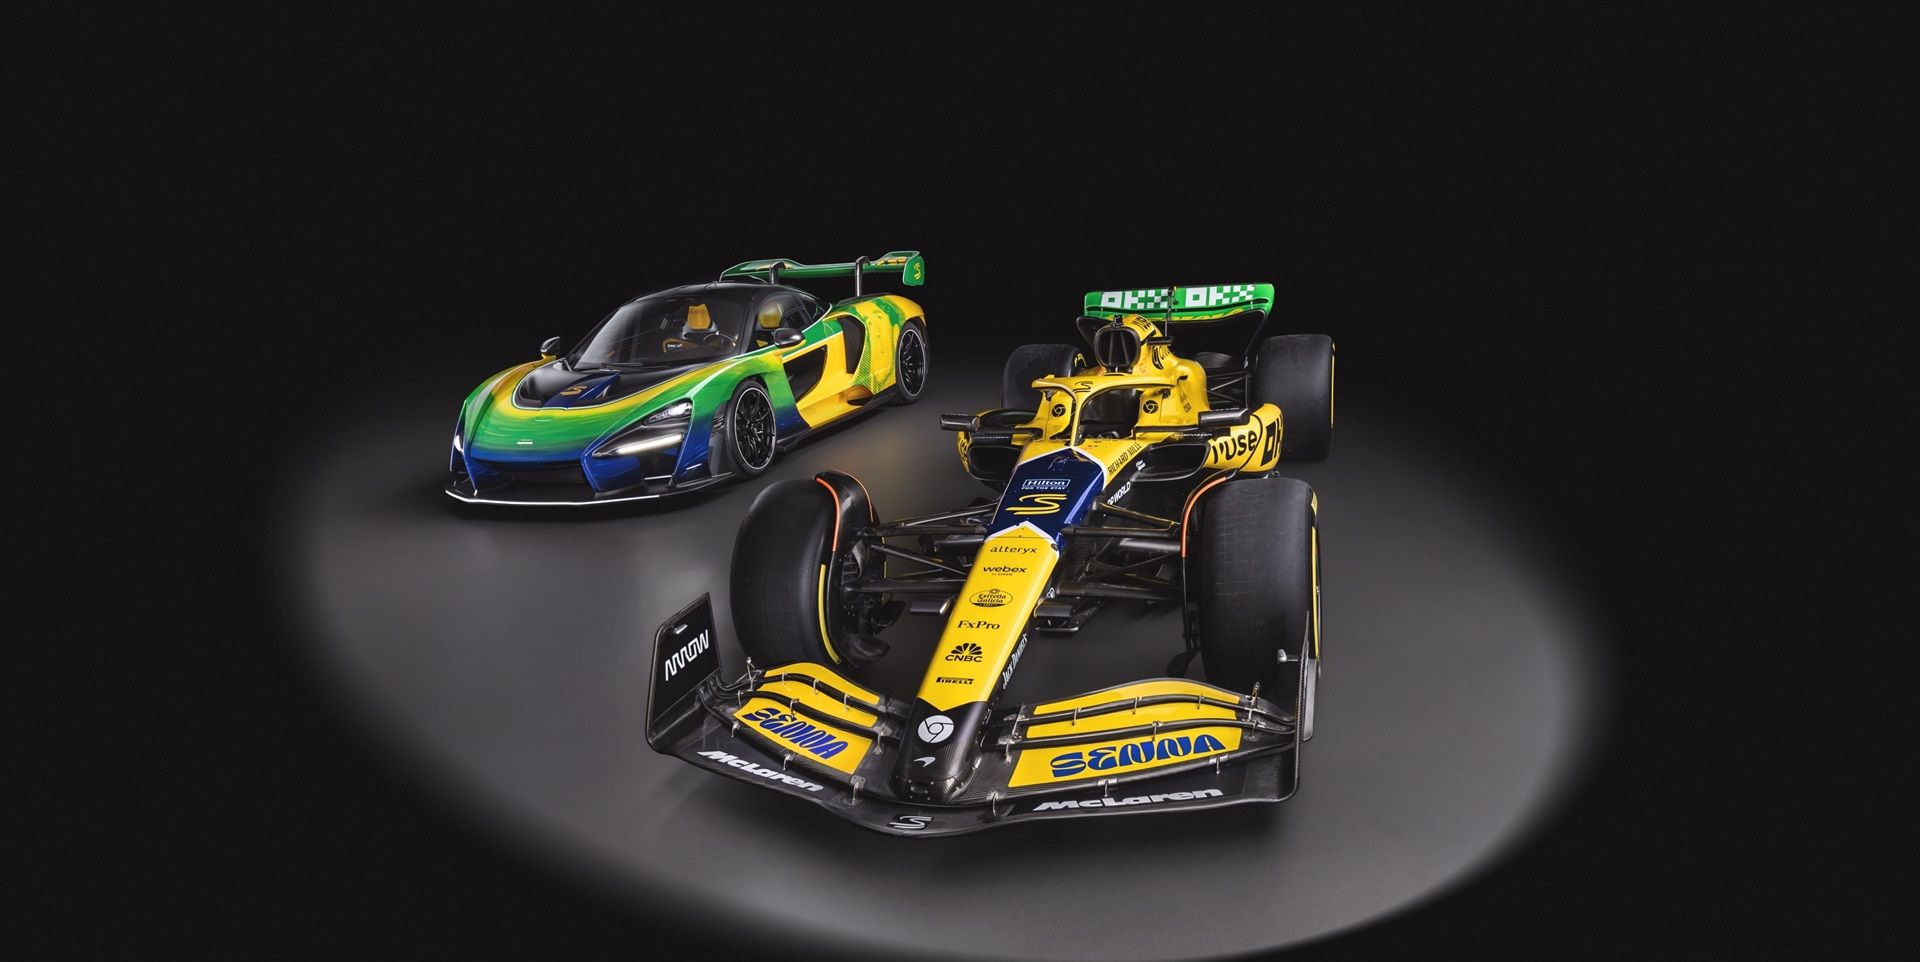 McLaren Pays Tribute to Ayrton Senna with One-Off Livery for Monaco GP